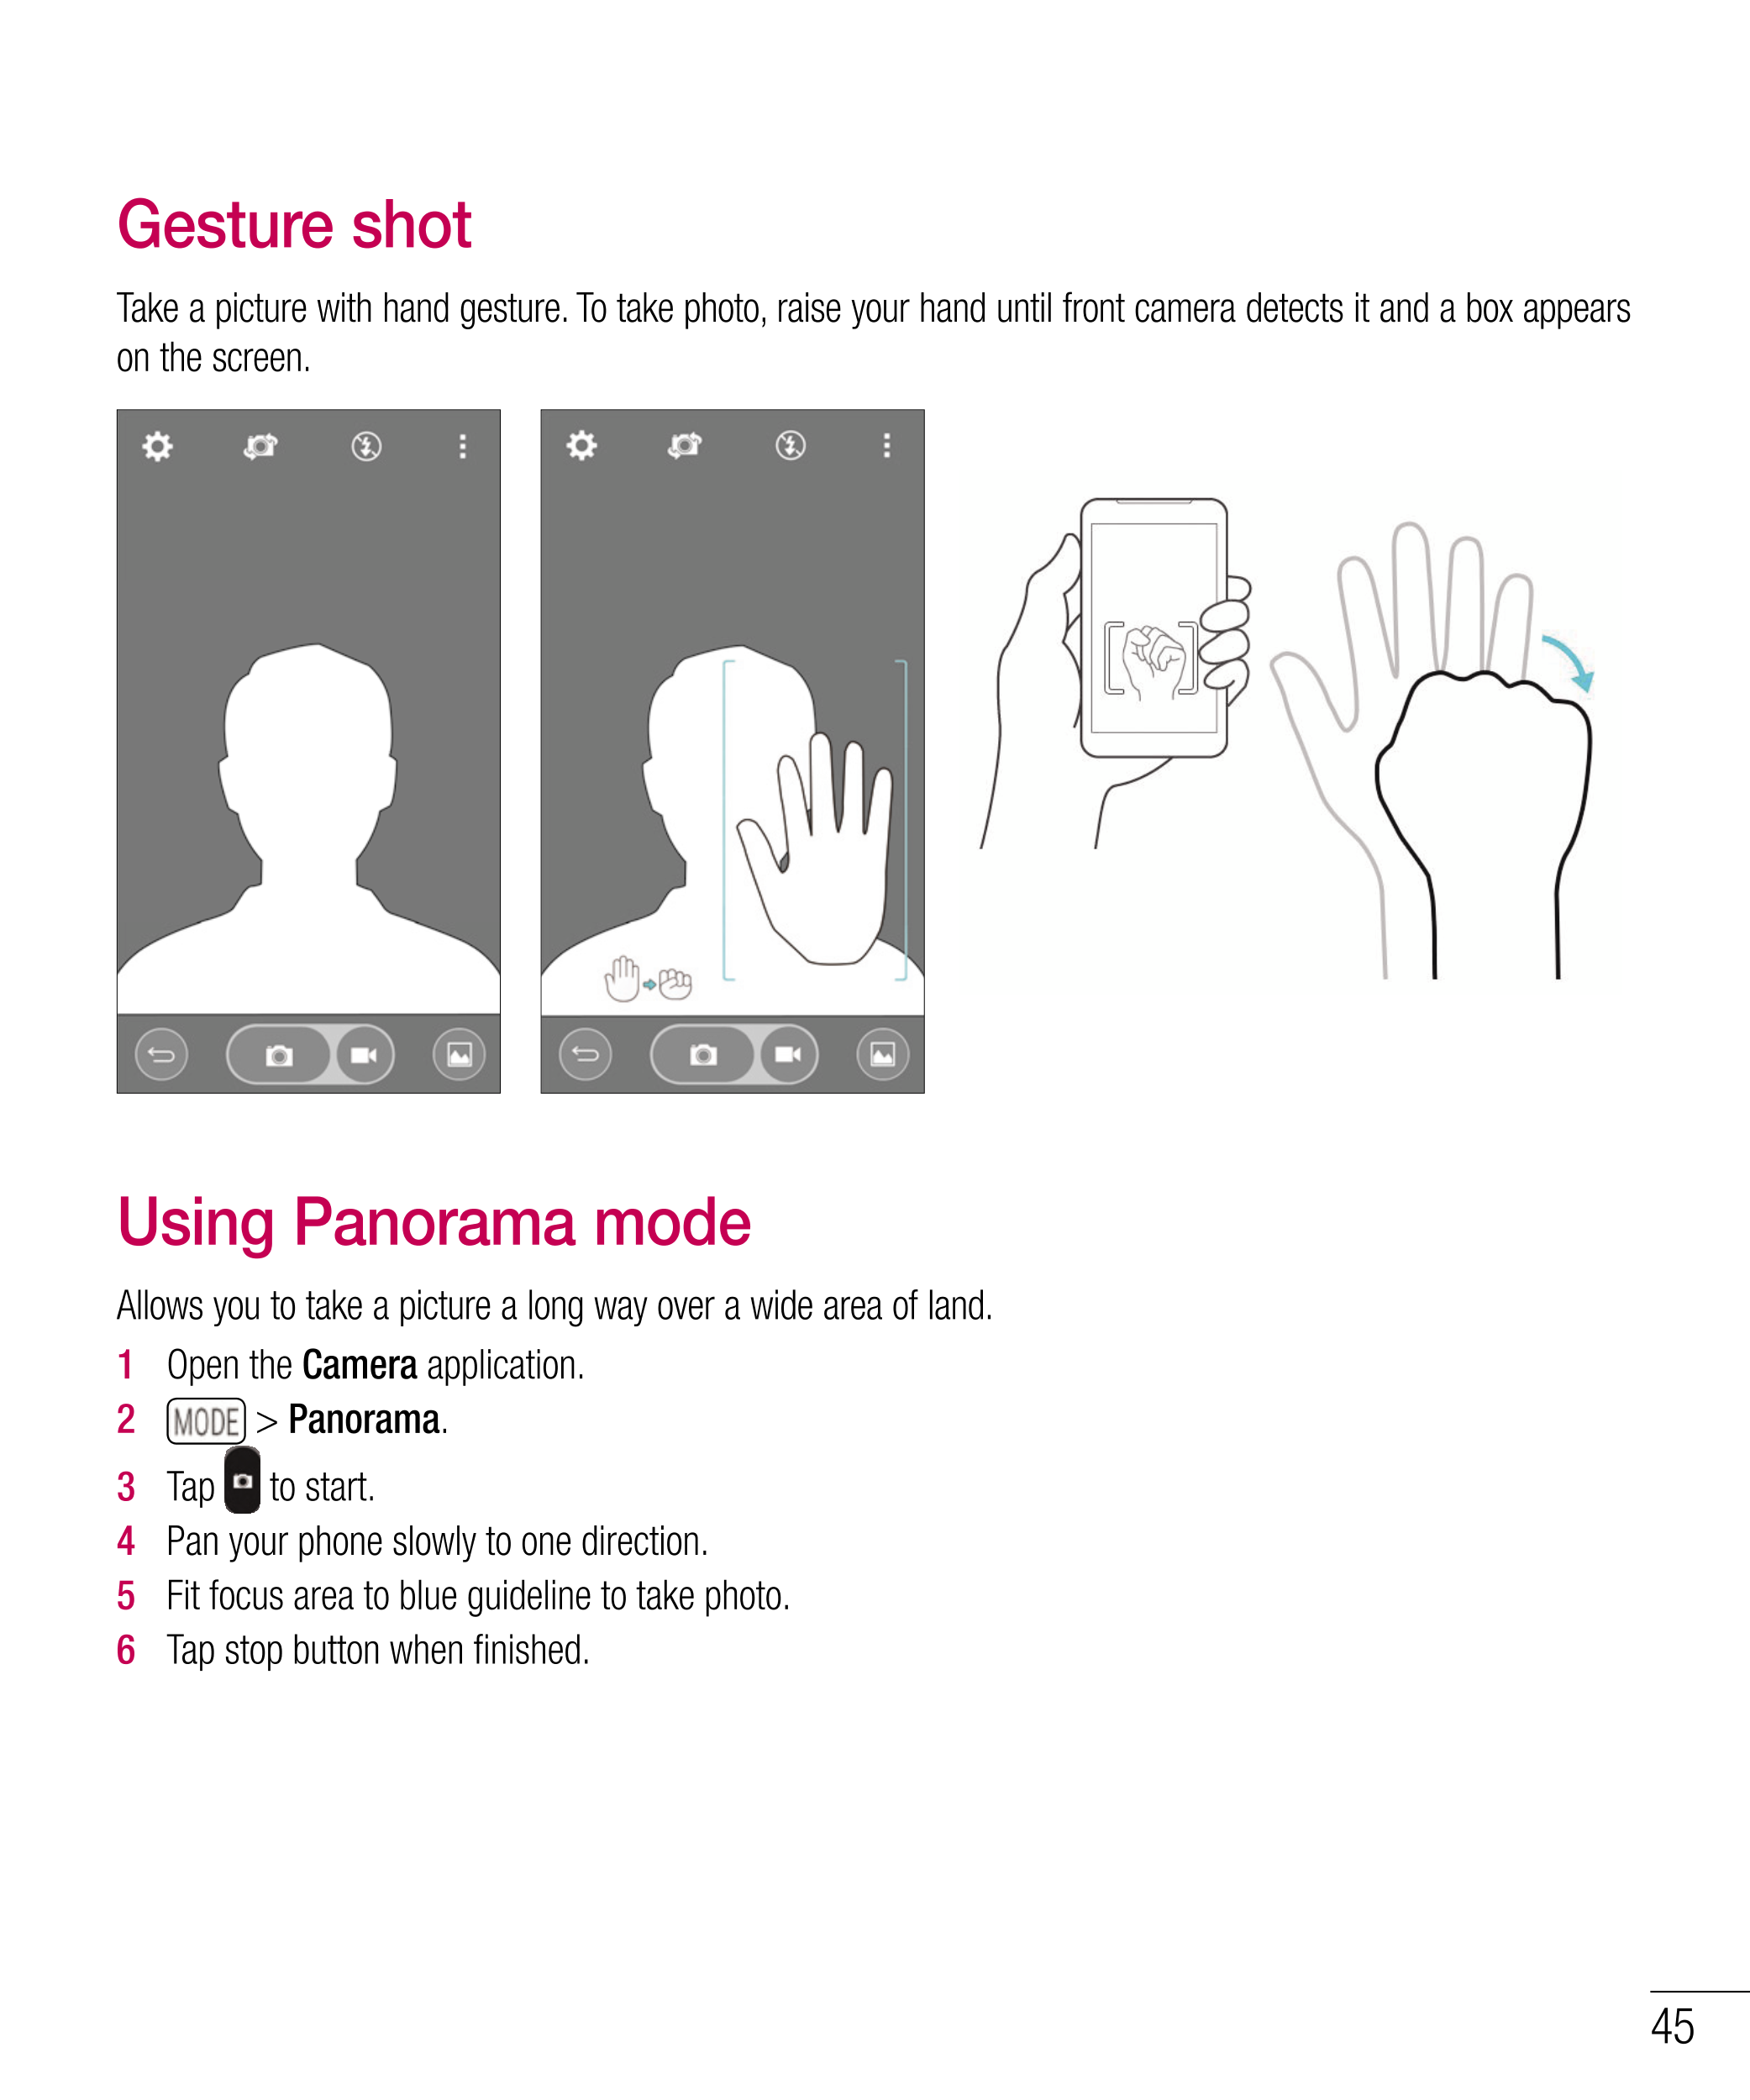 Gesture shot
Take a picture with hand gesture. To take photo, raise your hand until front camera detects it and a box appears 
o